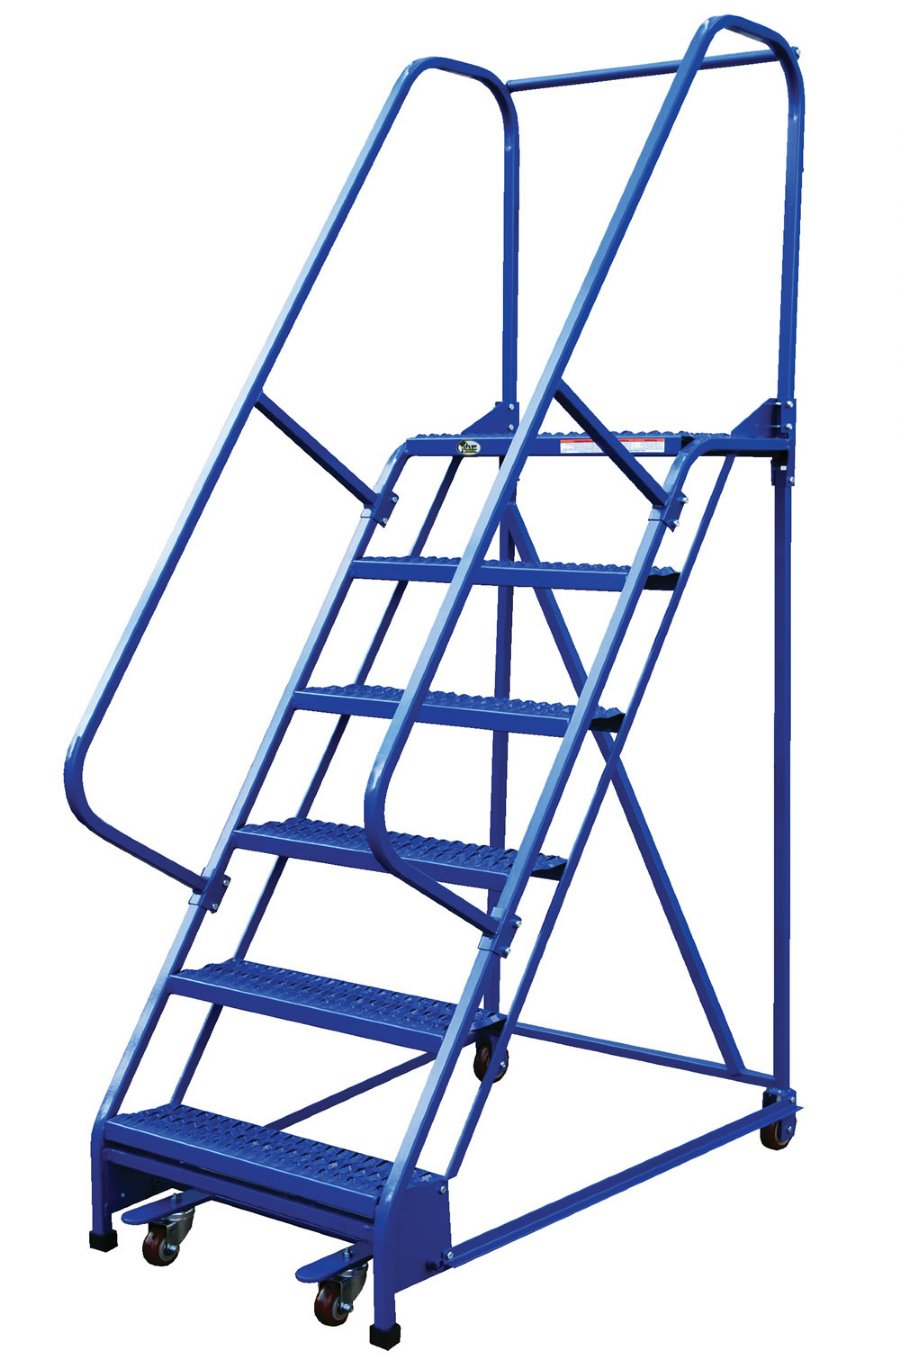 Warehouse ladder with handrails and safety rails